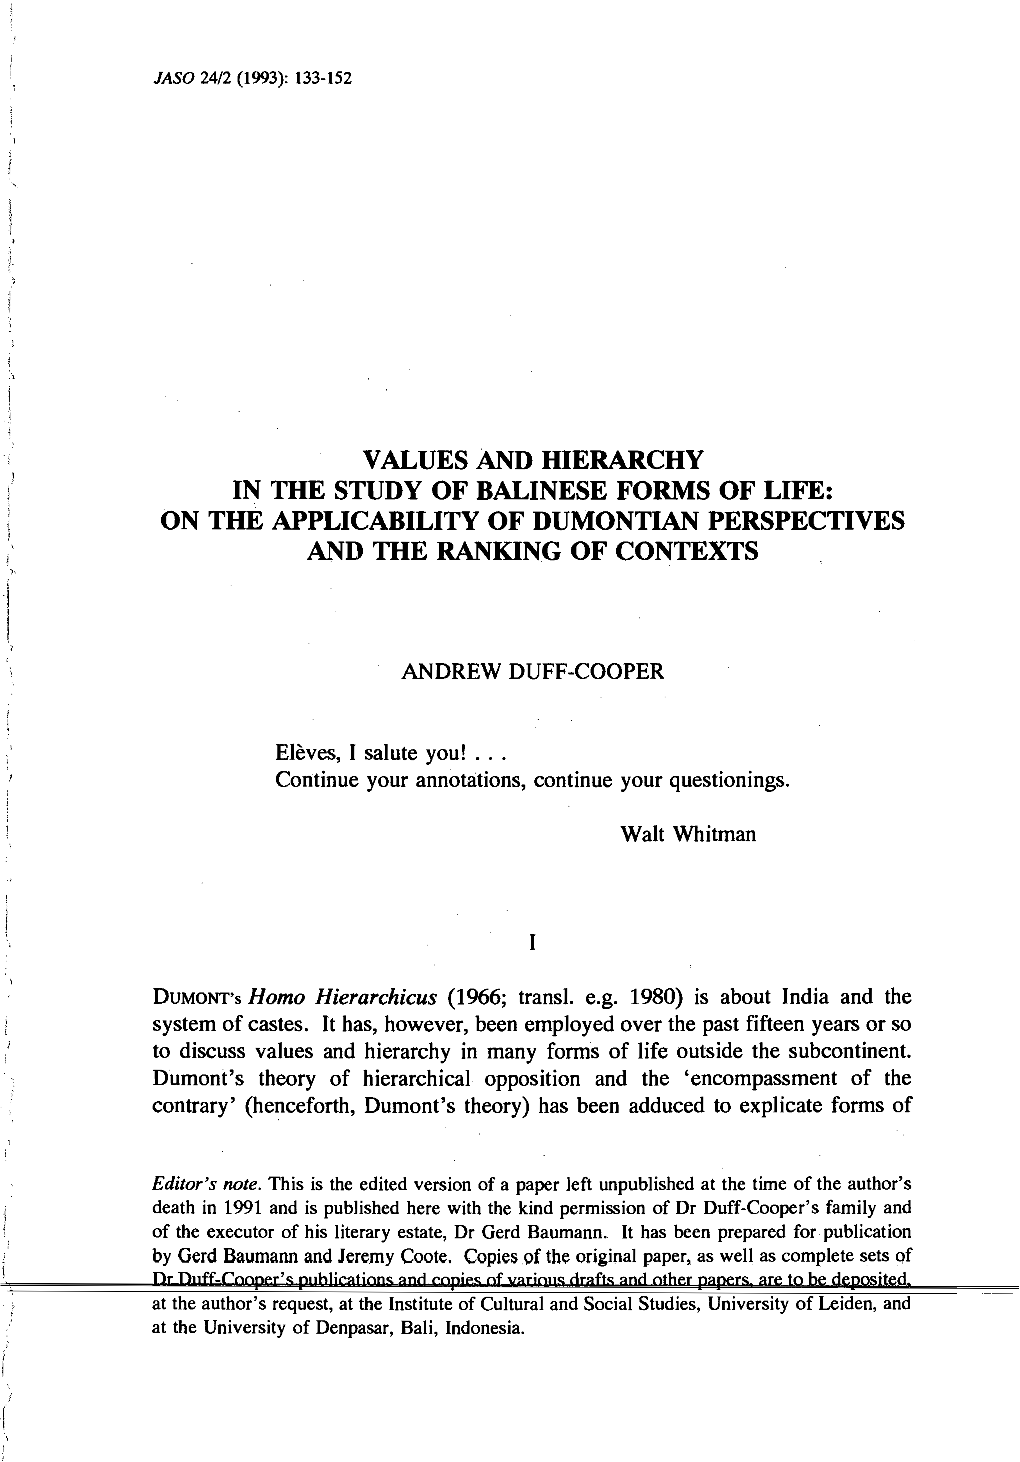 Values and Hierarchy in the Study of Balinese Forms of Life: on the Applicability of Dumontian Perspectives and the Ranking of Contexts